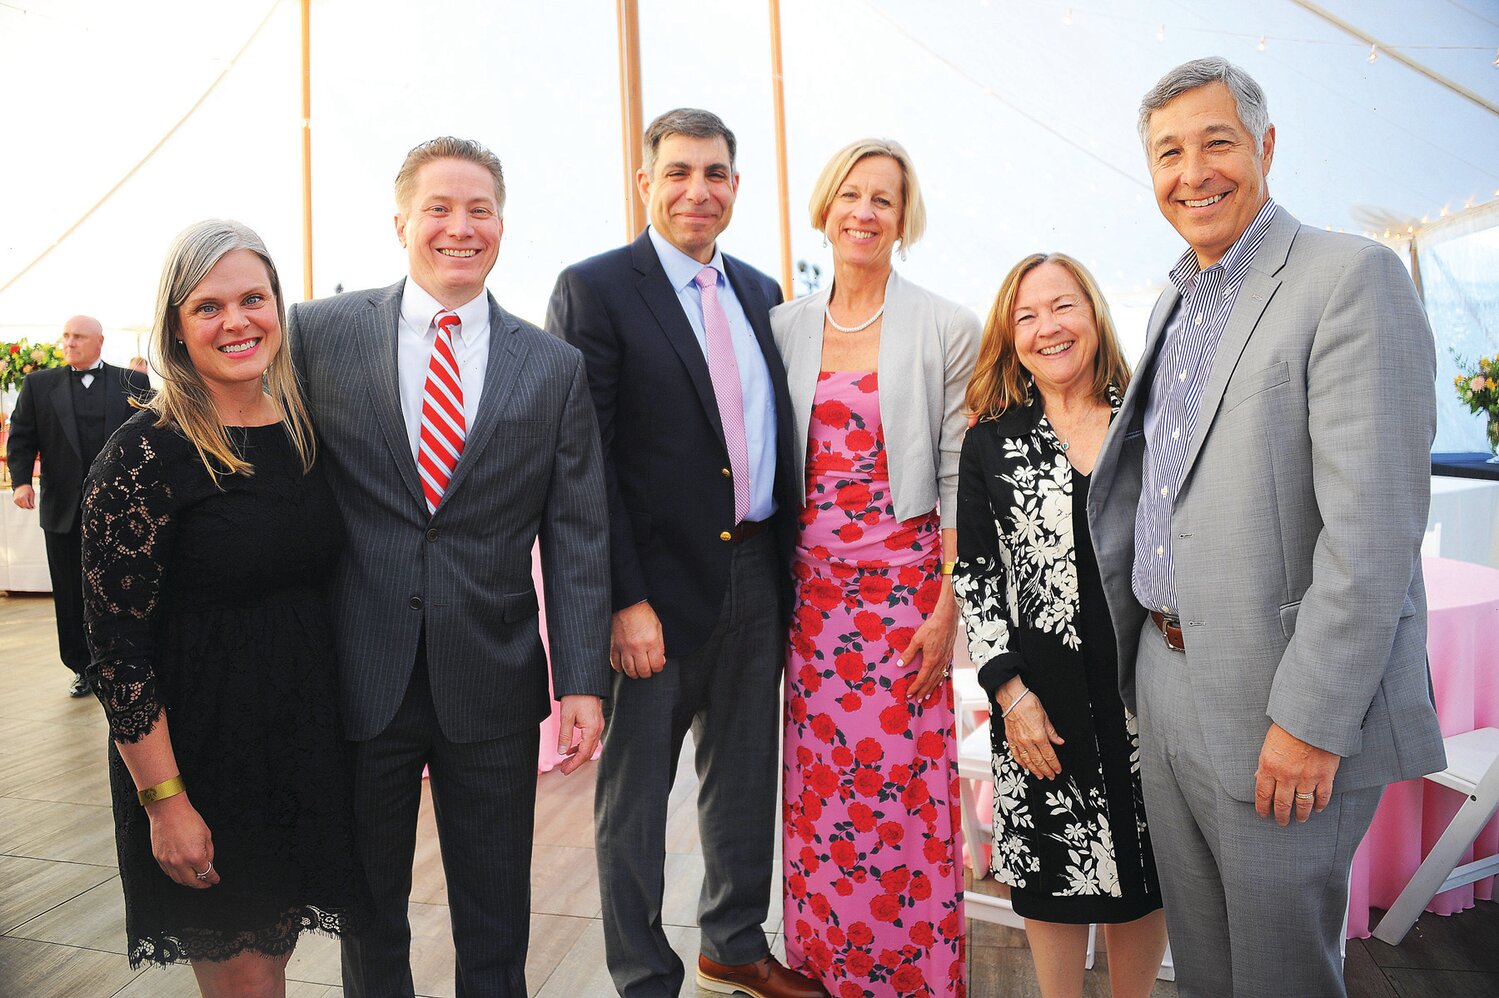 Dr. Suzanne Reinhardt, Dr. Sean Reinhardt, Dr. Rich Mascolo, Amy Mascolo, Terrie Mooradd and Dr. Michael Mooradd.